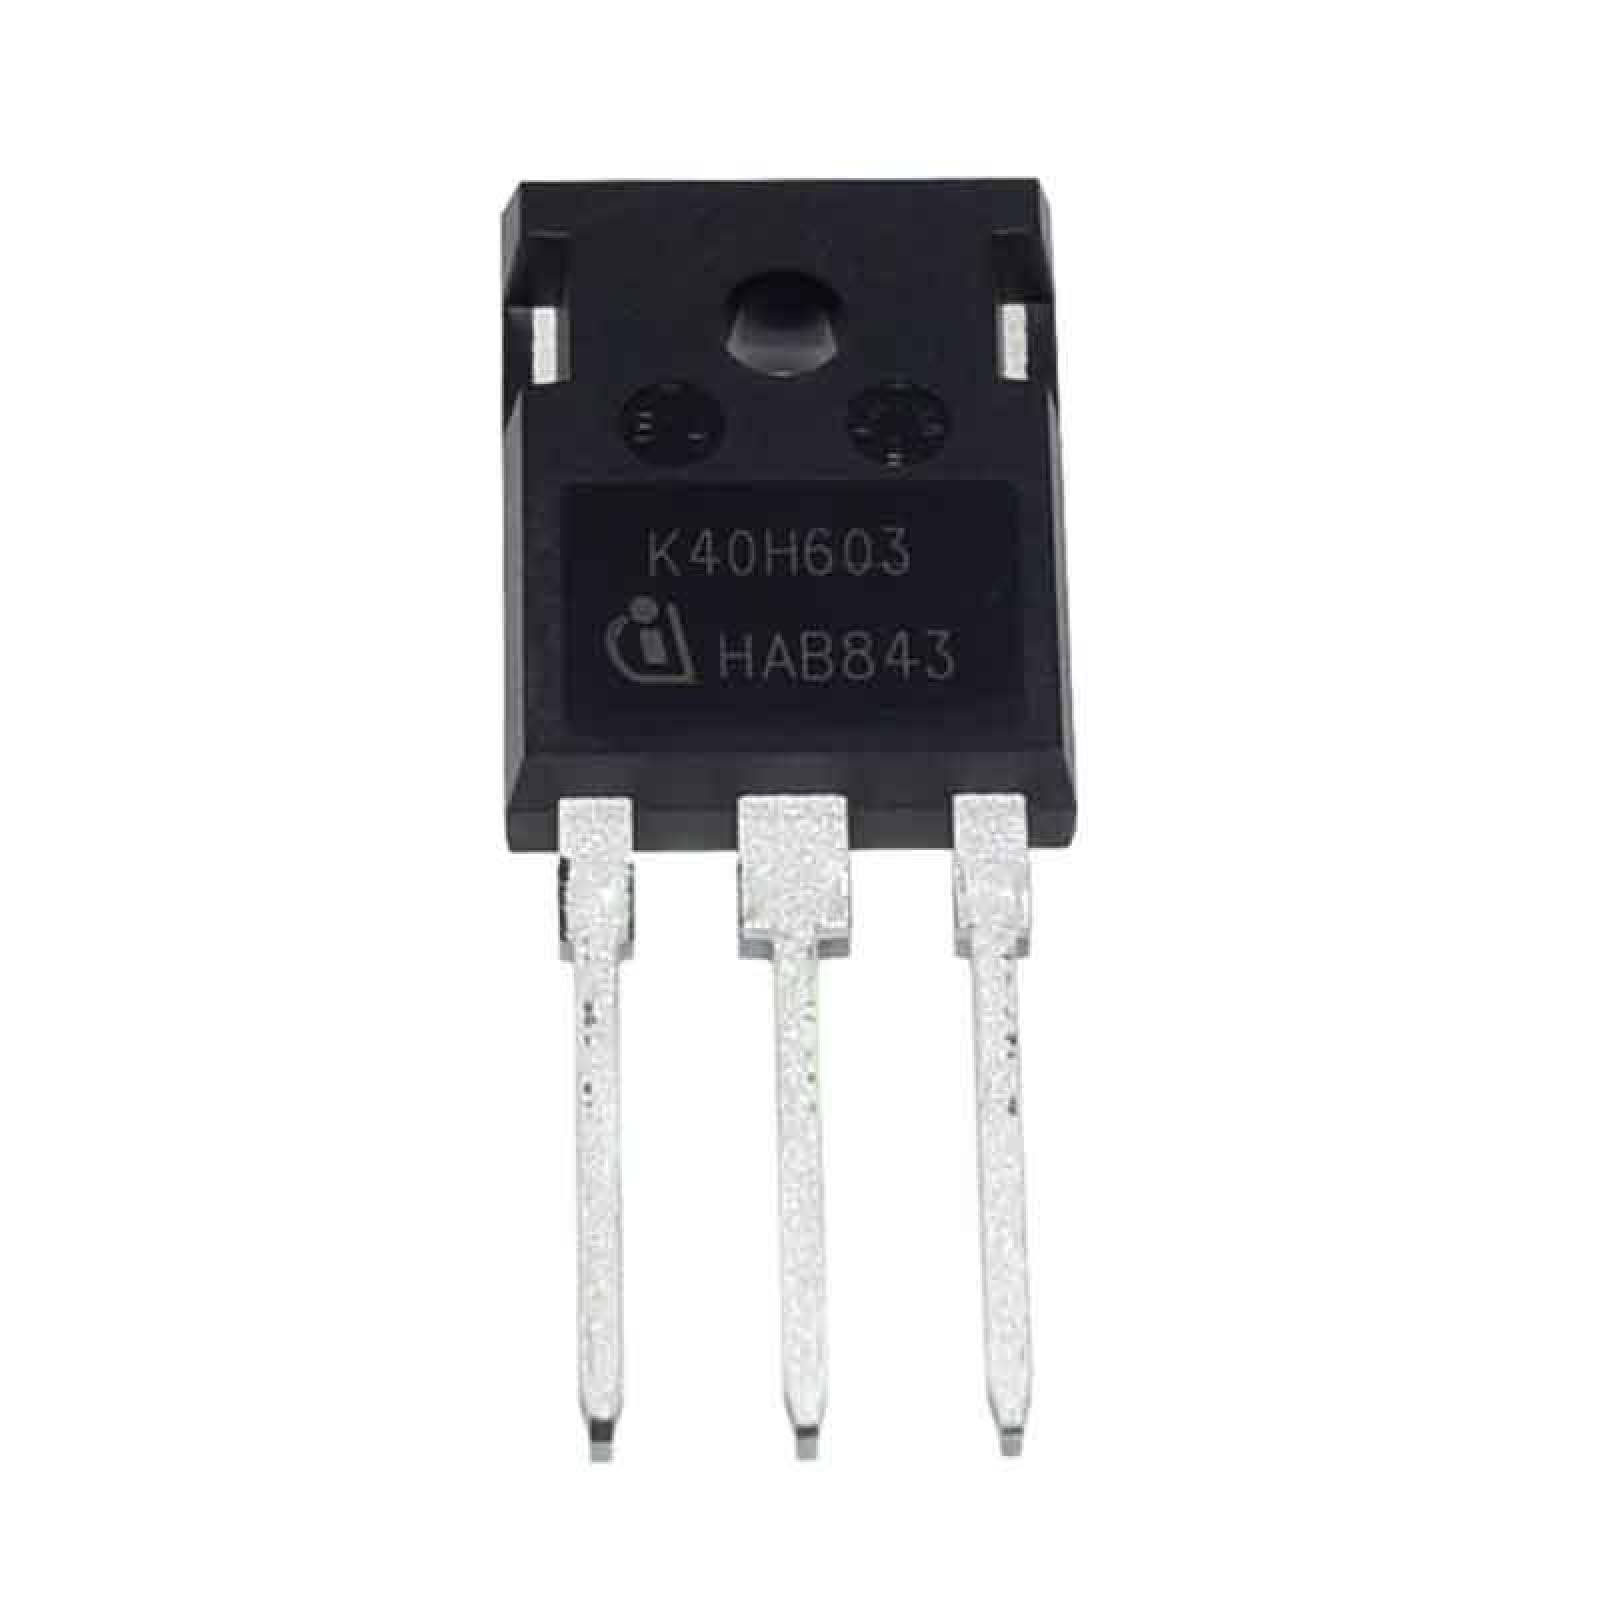 K40H603/IKW40N60H3 Igbt Alta Velocidad In Trench 600V 40A Con Diodo Paralelo 